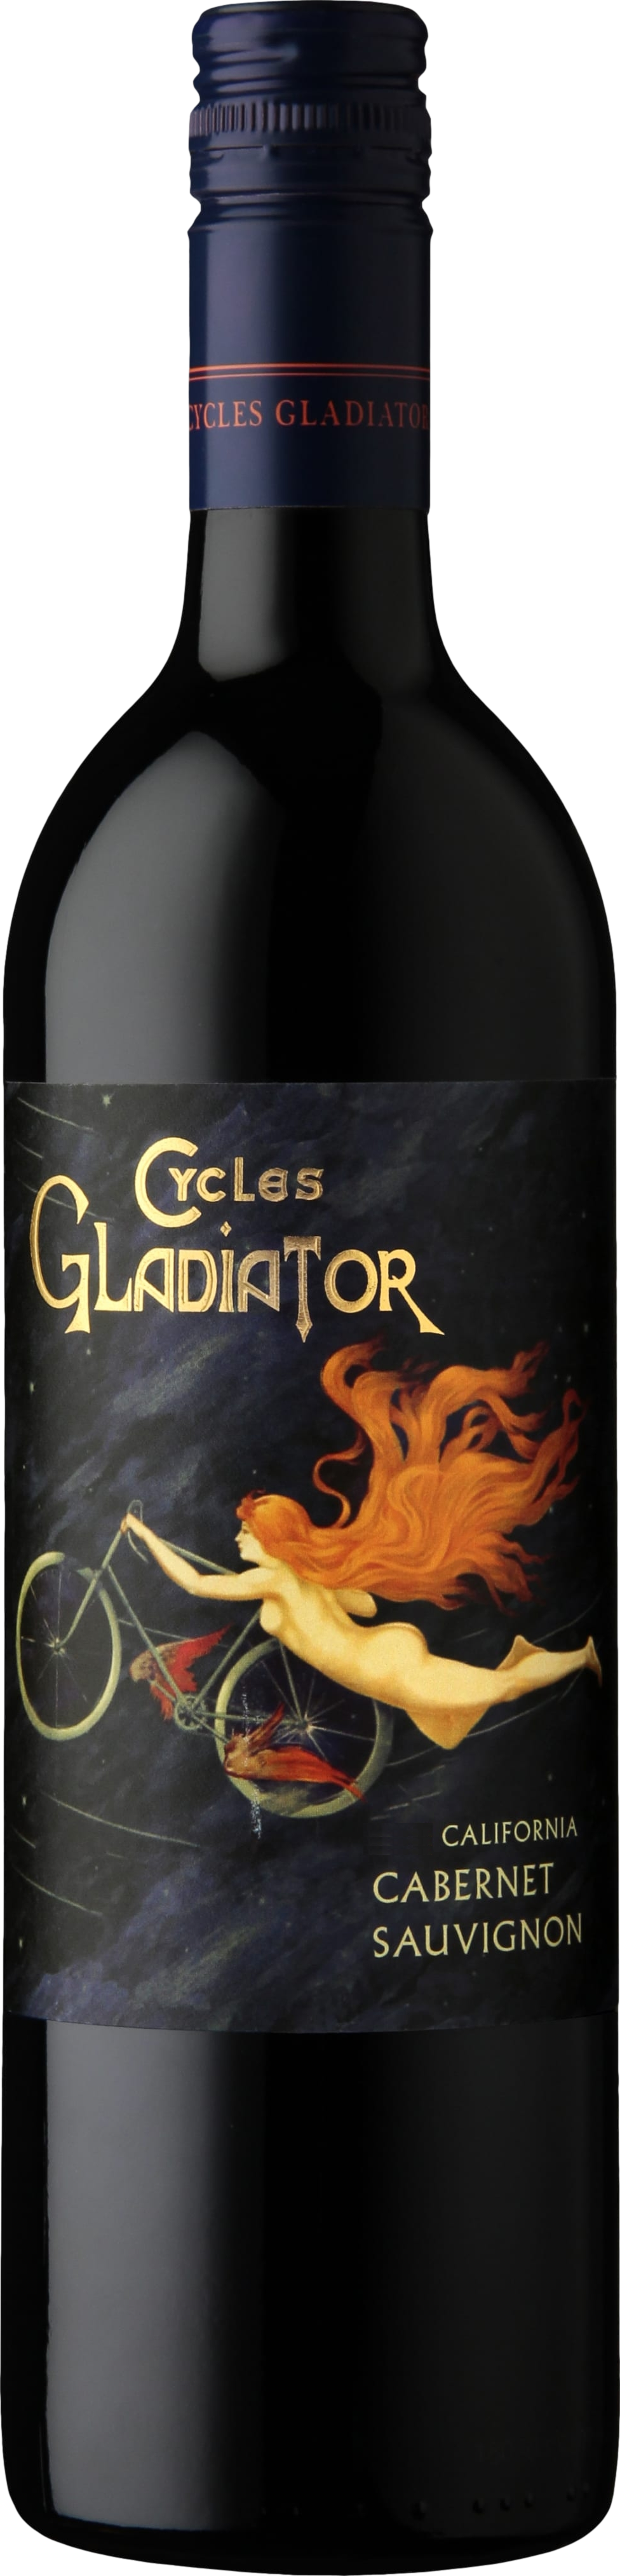 Cycles Gladiator Cabernet Sauvignon 2018 Hahn Family Wines 8wines DACH